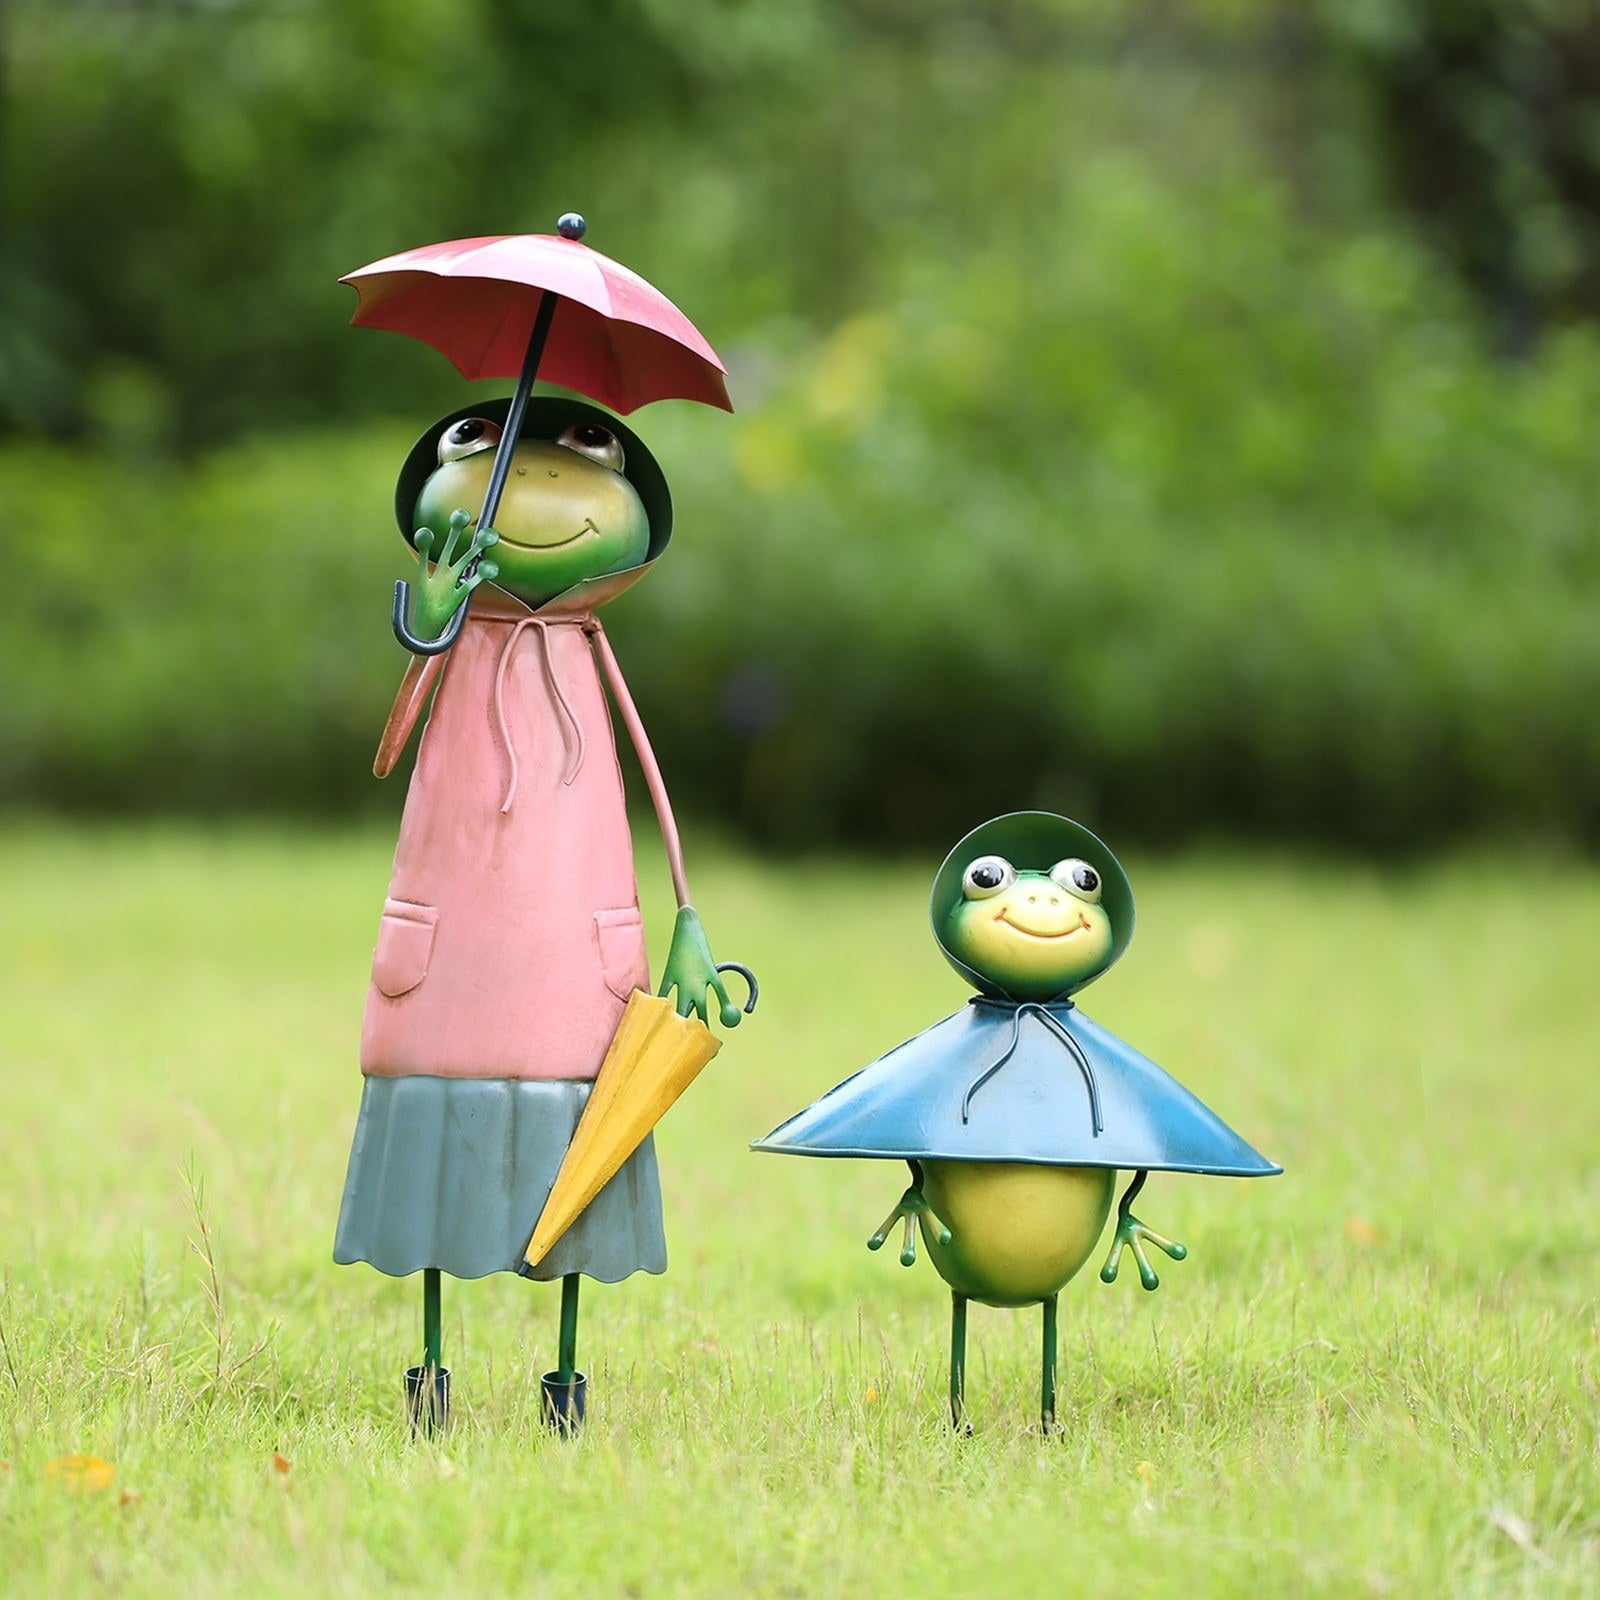 Gardener frogs are really cute as figurine - ornament, maybe as gift!